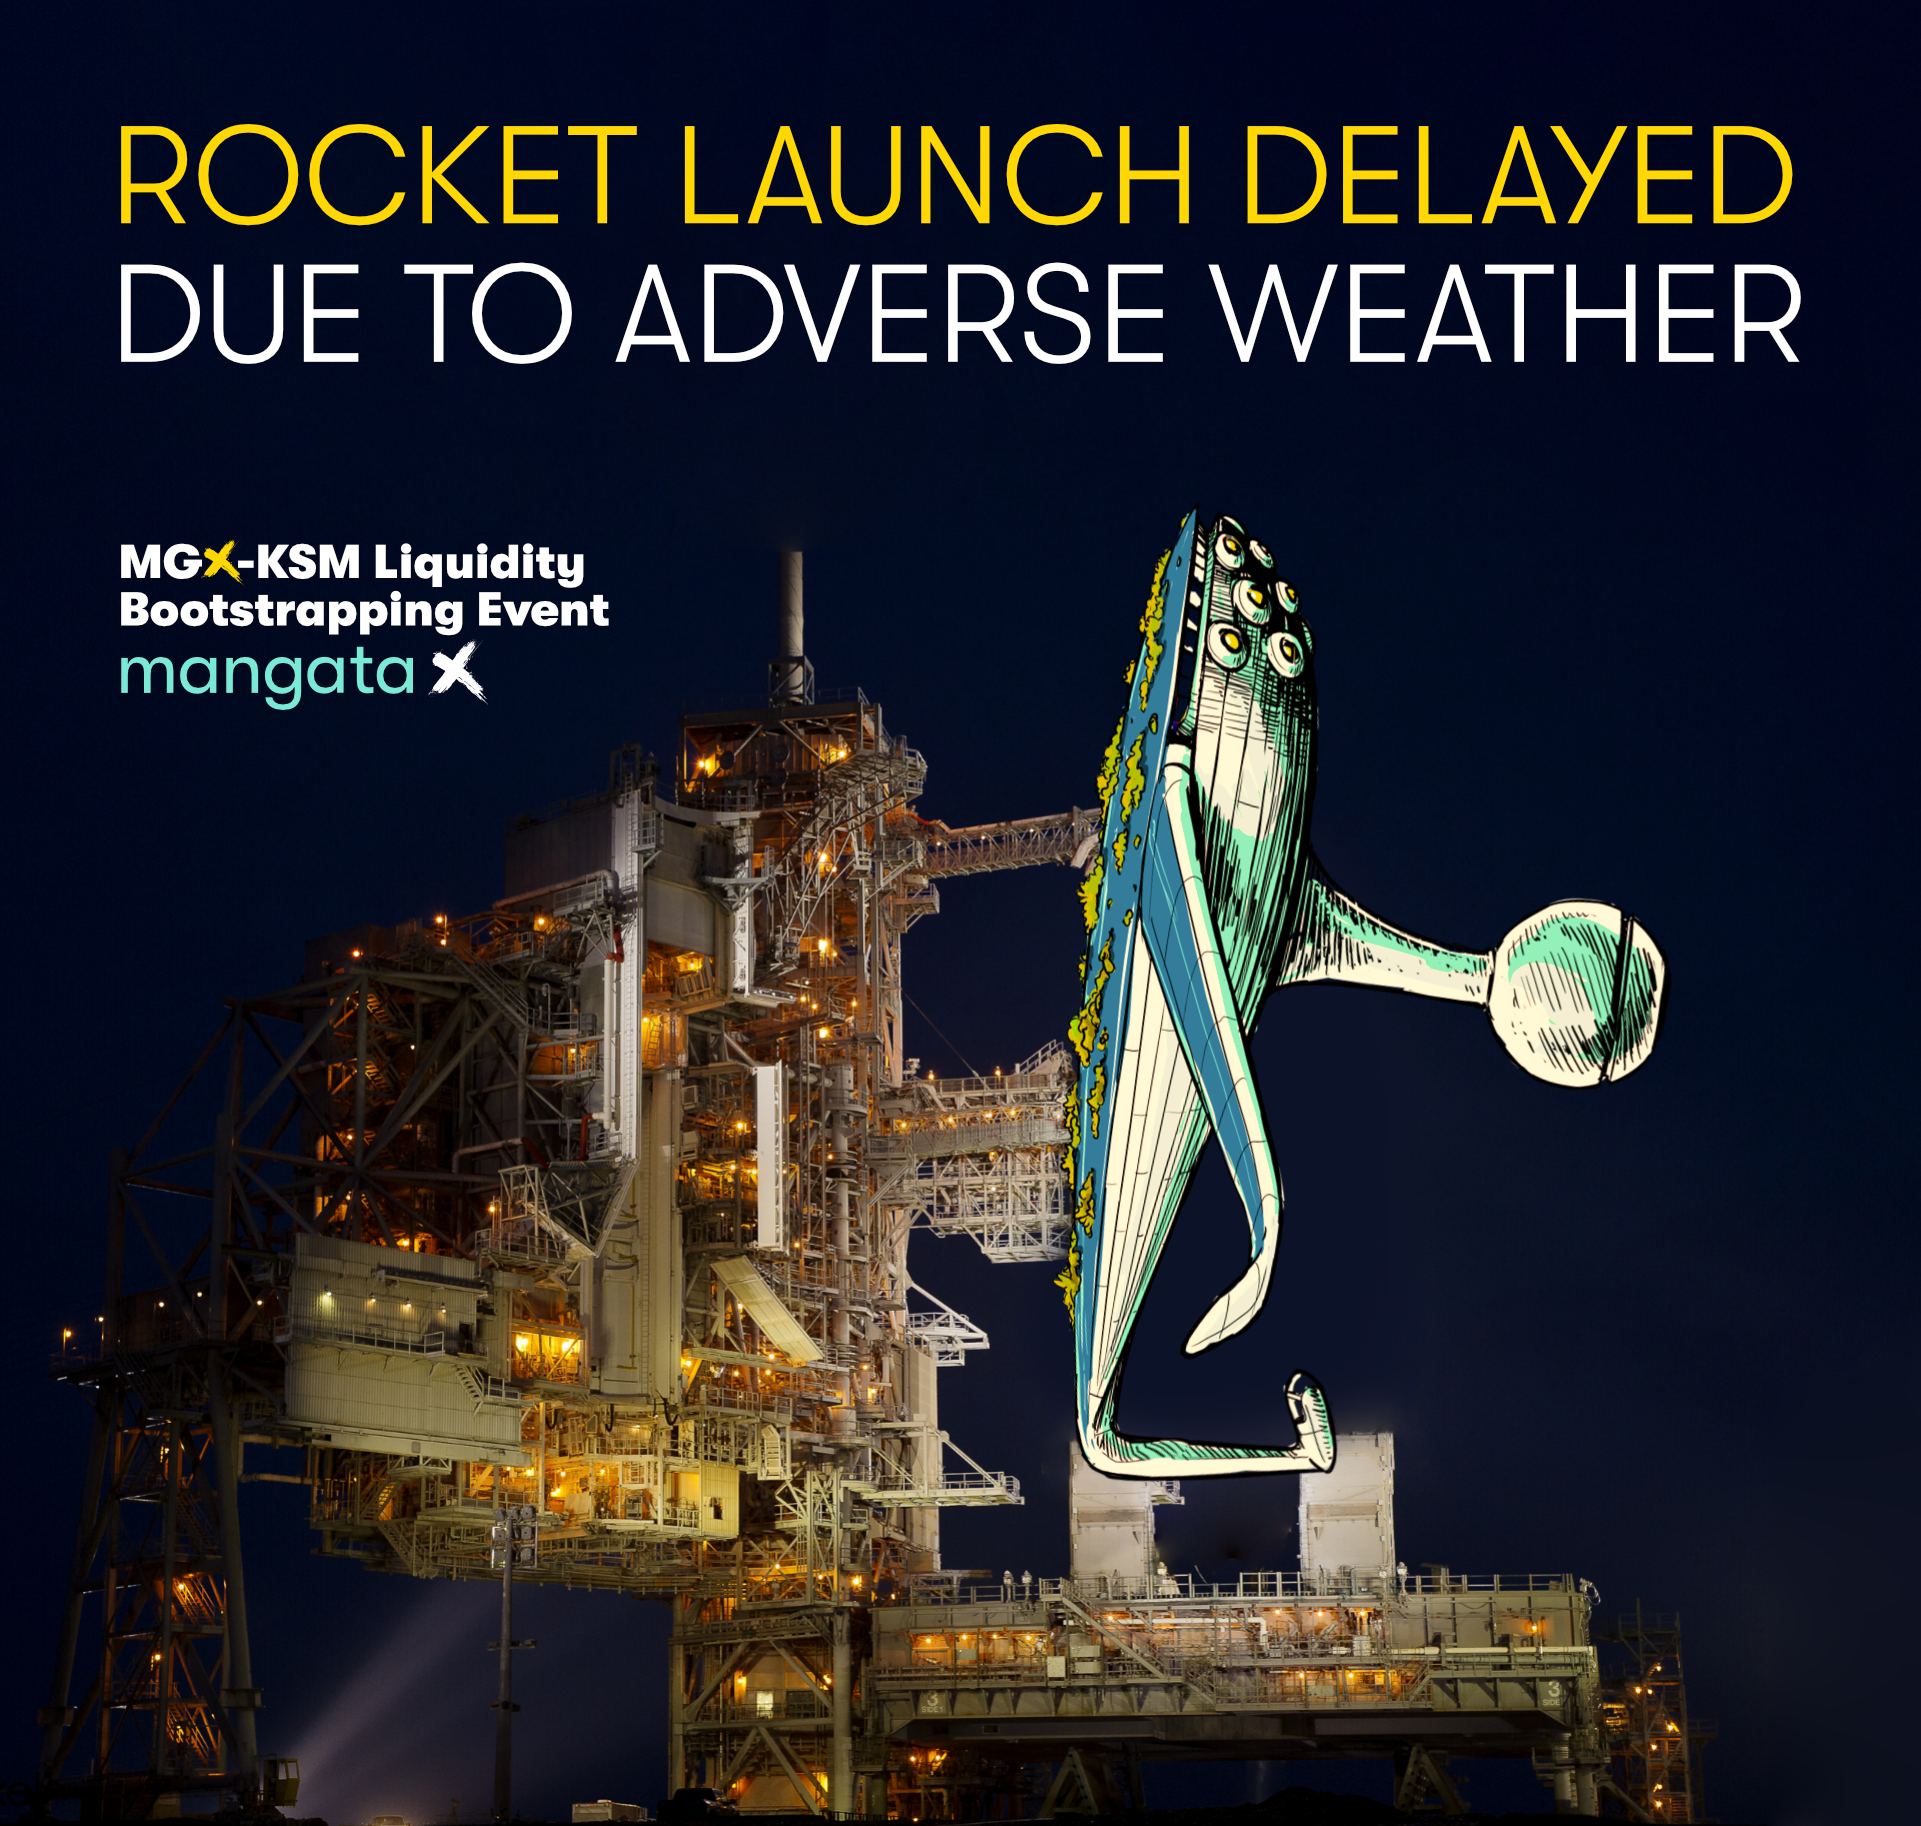 Rocket launch delayed due to adverse weather